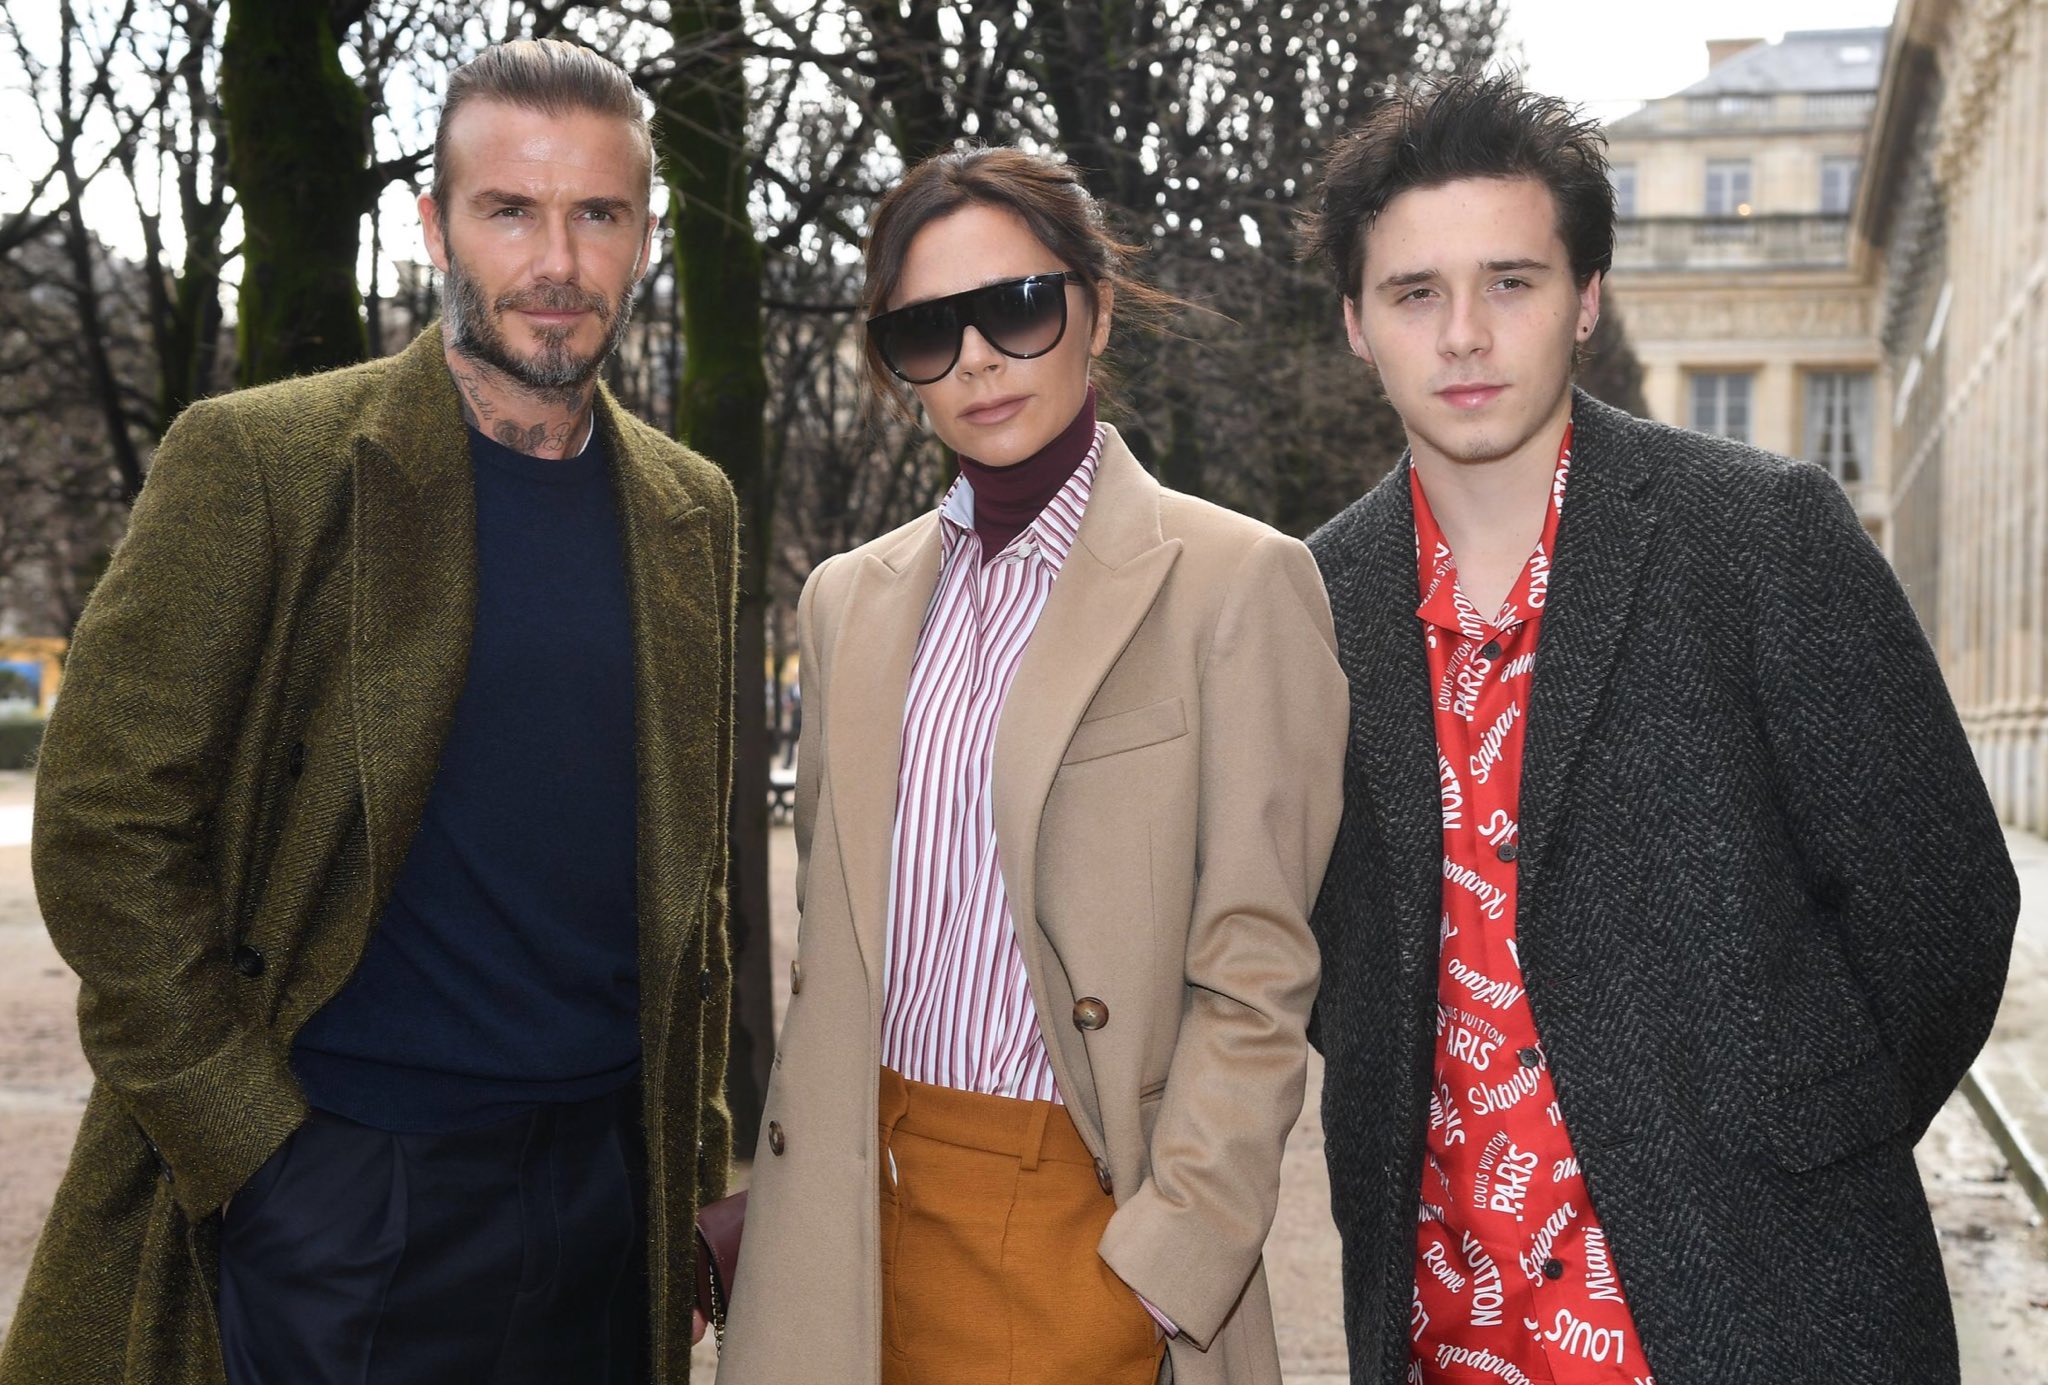 Mike Sington on X: David and Victoria Beckham take their son Brooklyn to  the Louis Vuitton Menswear Fall/Winter 2018-2019 show at Paris Fashion  Week. My parents took me to the zoo once.